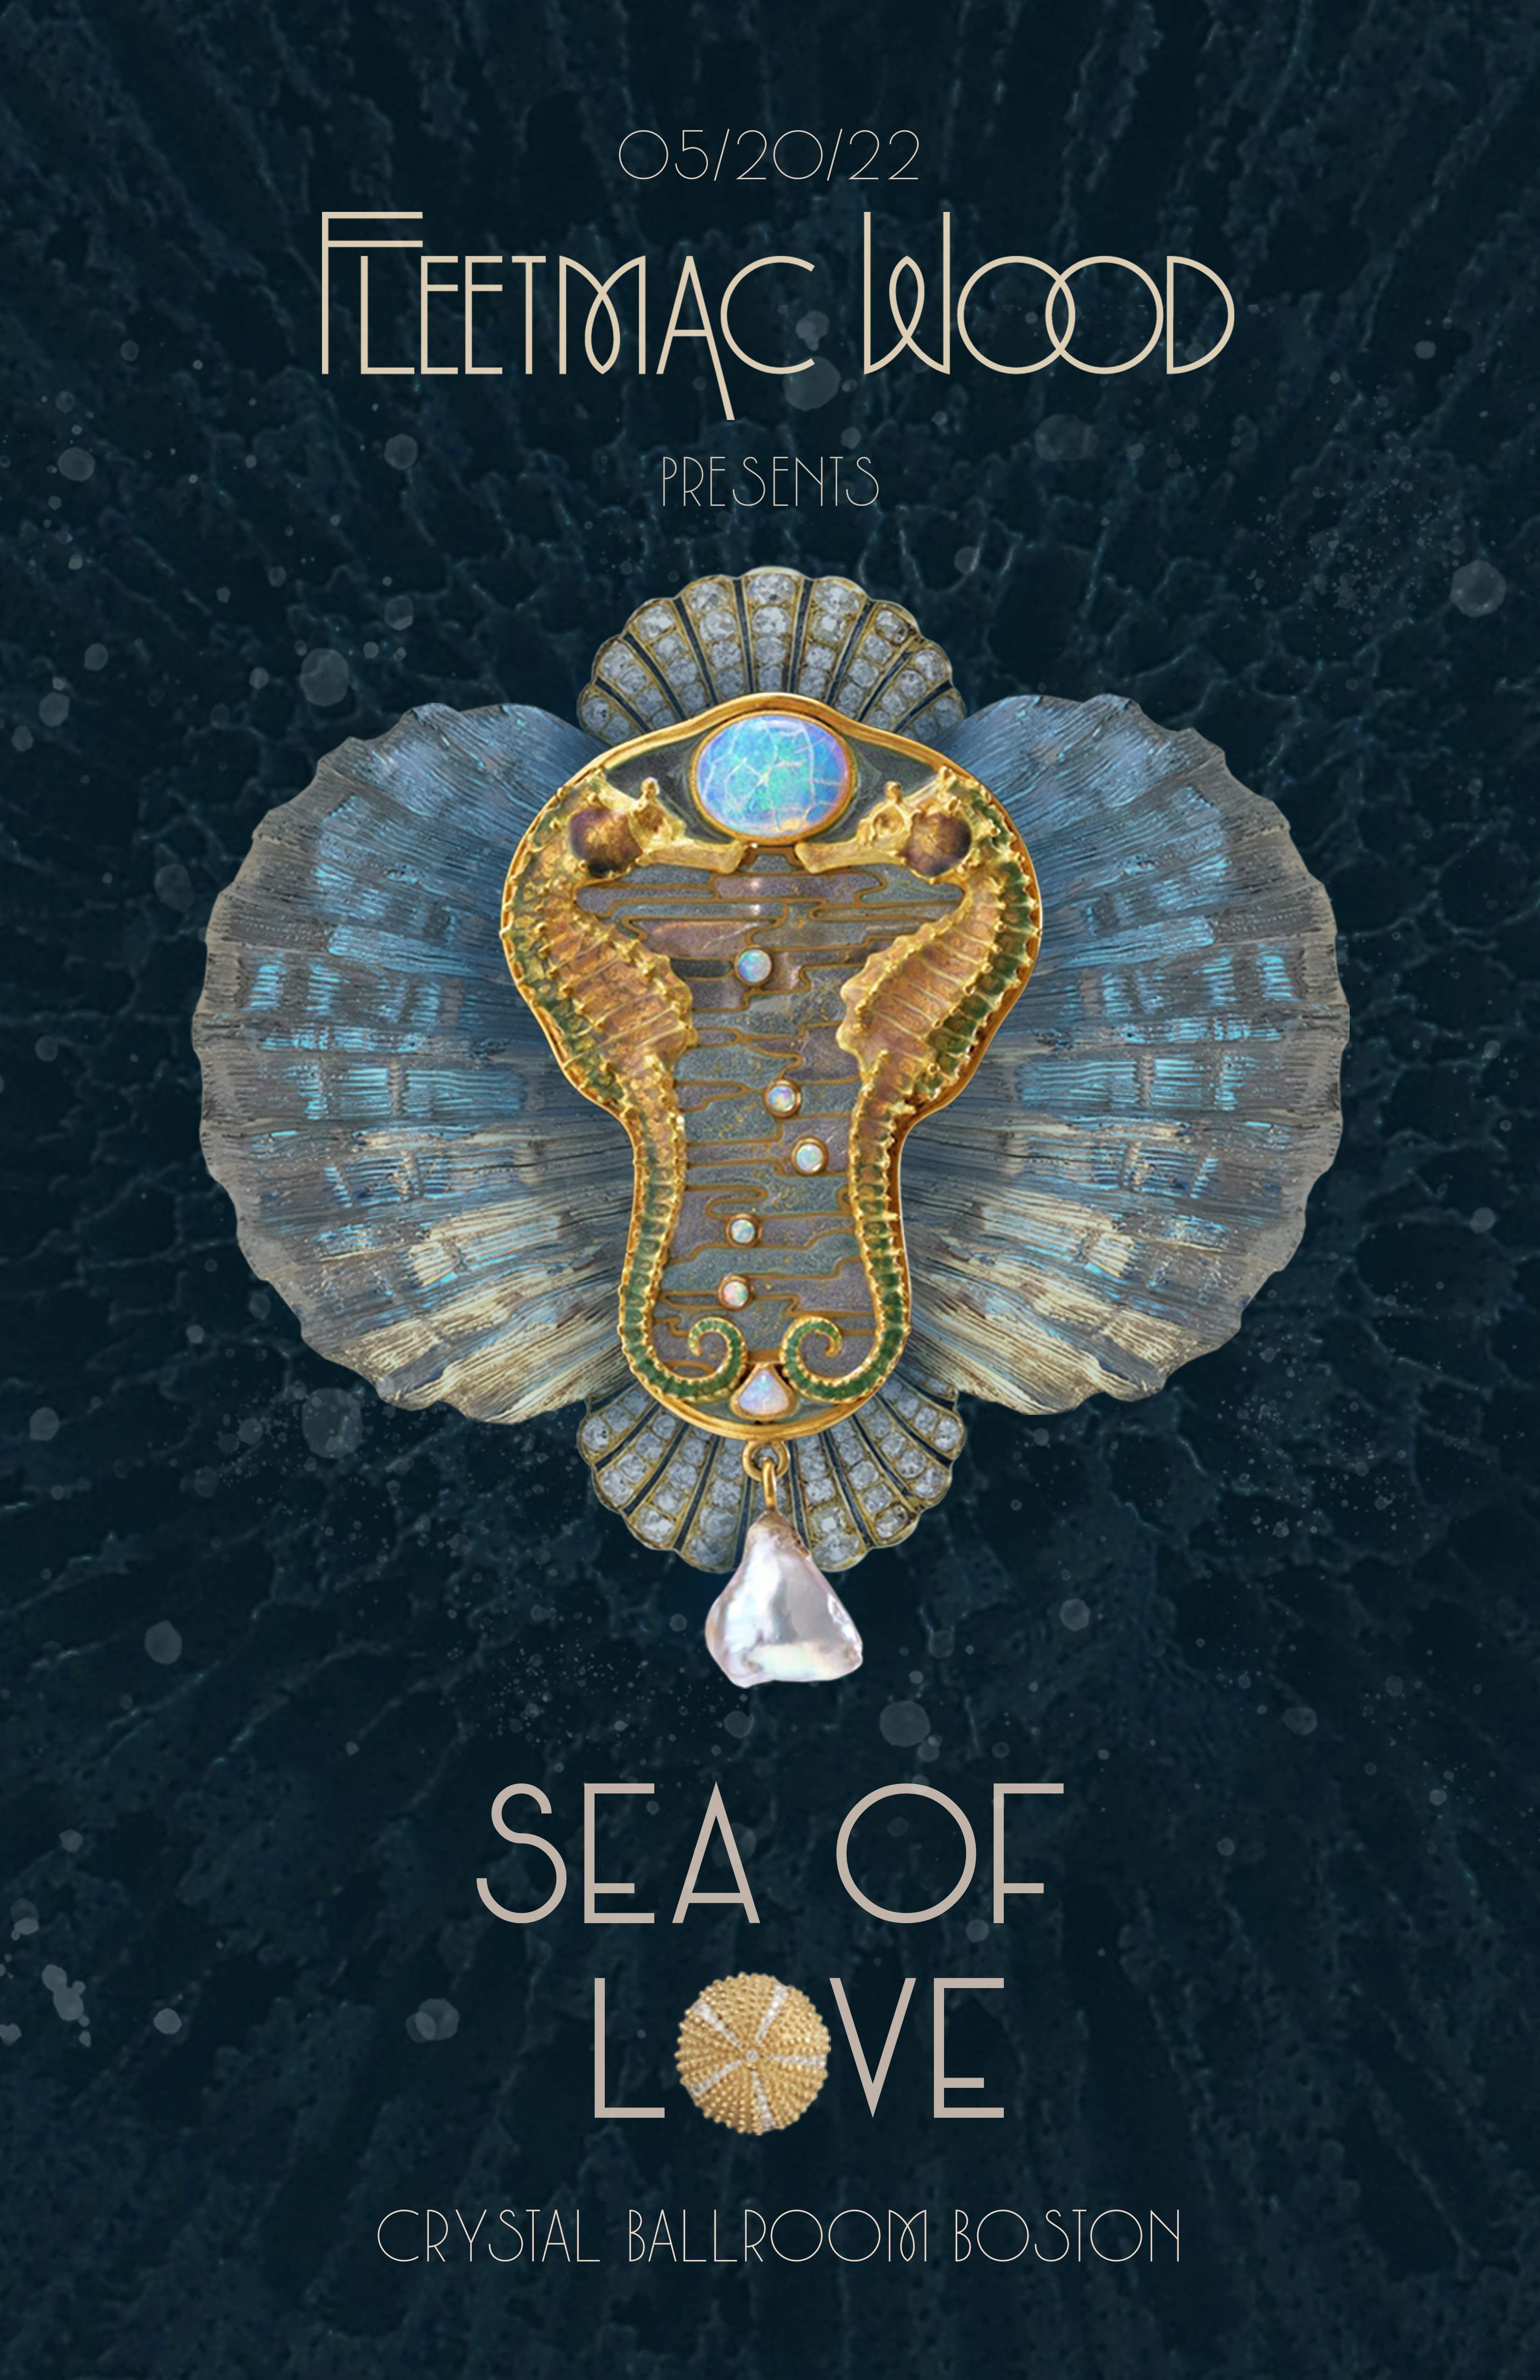 sirens of the sea remixed